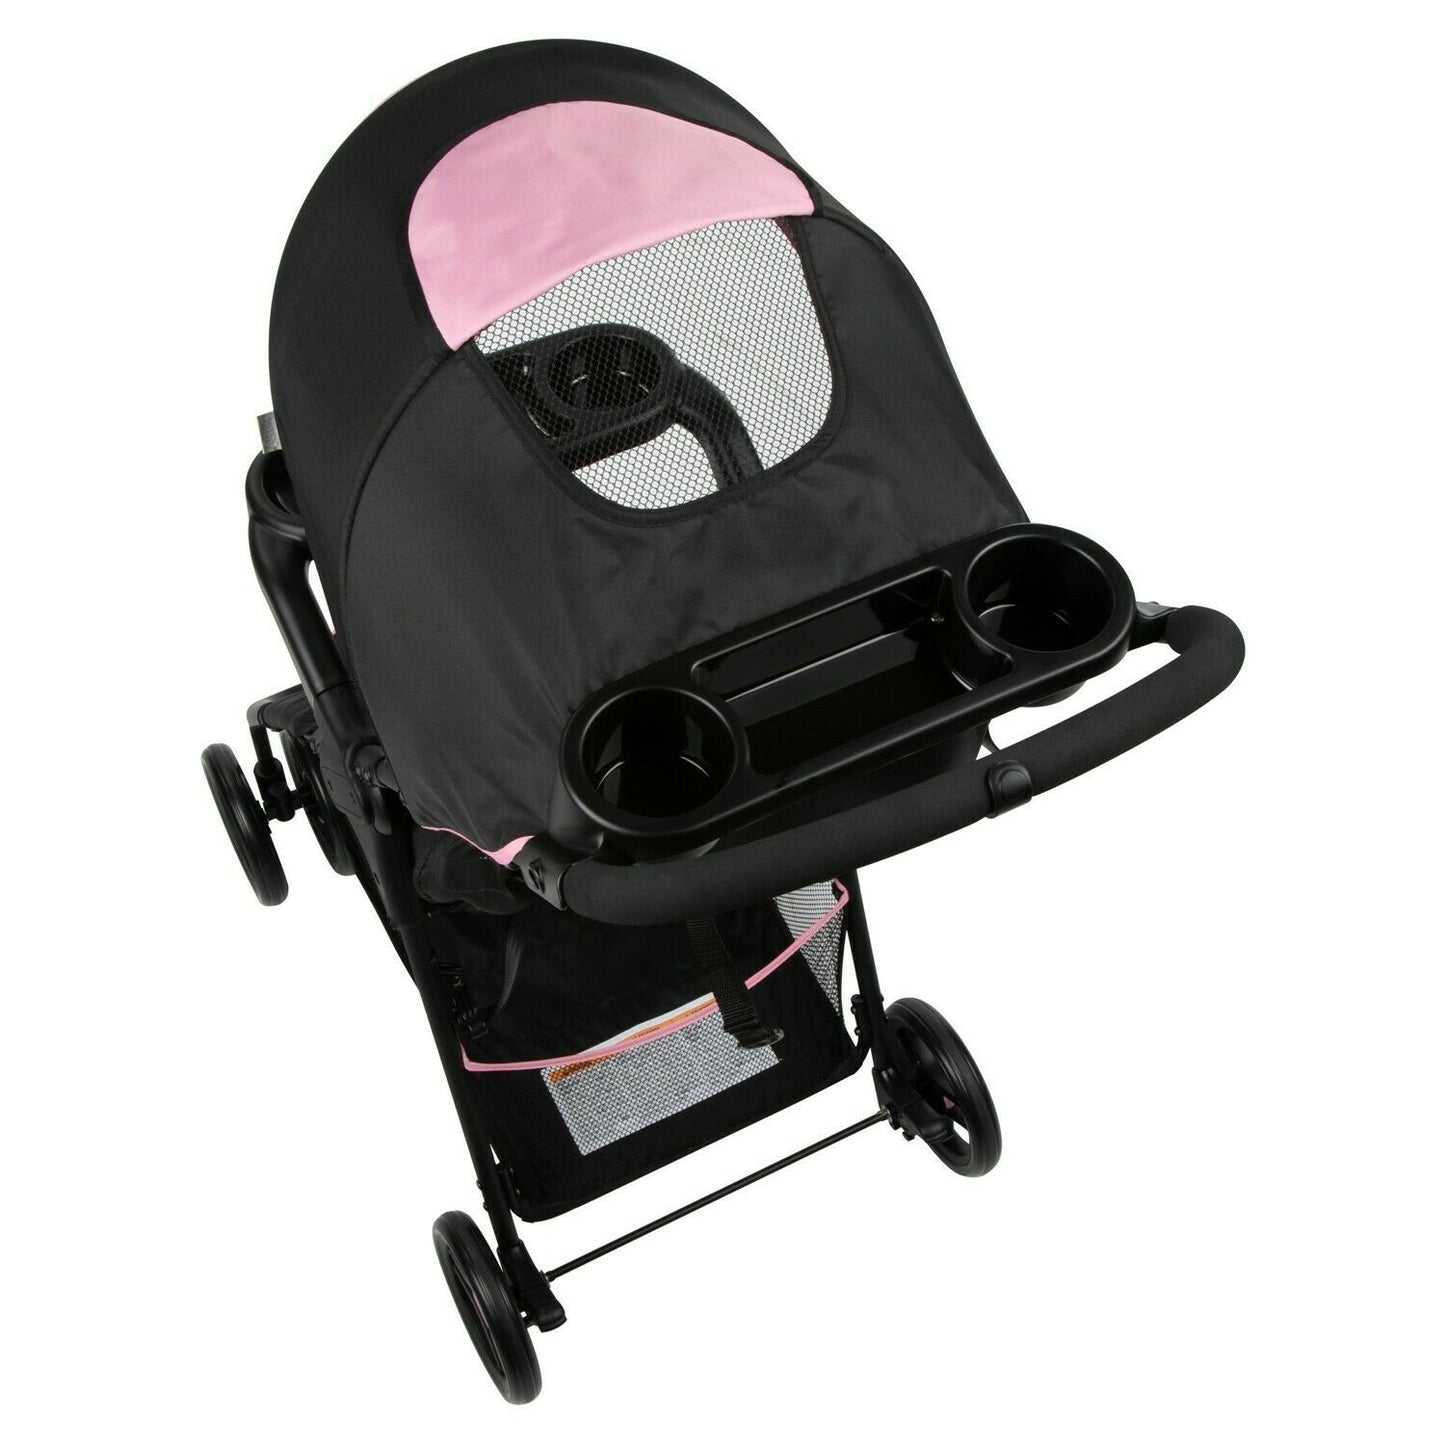 Disney Baby Stroller with Car Seat High Chair Infant Playard Travel System Combo